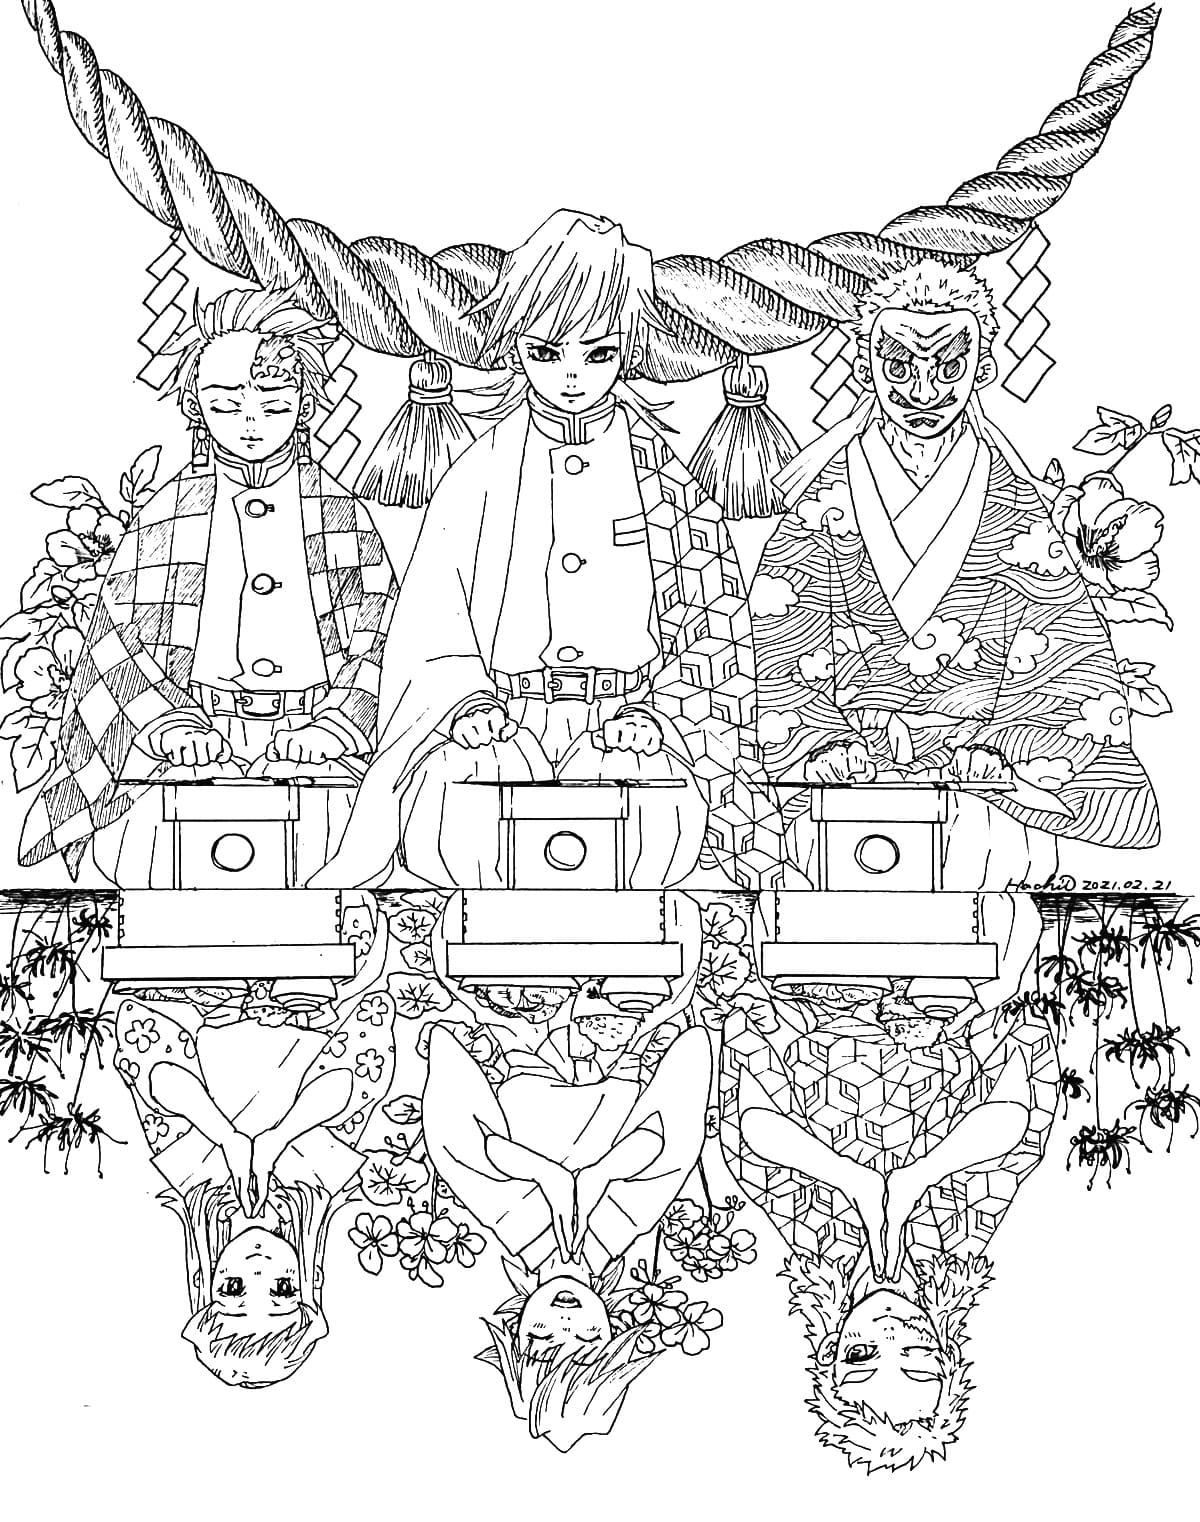 Demon Slayer Coloring Pages - 90 Free coloring pages